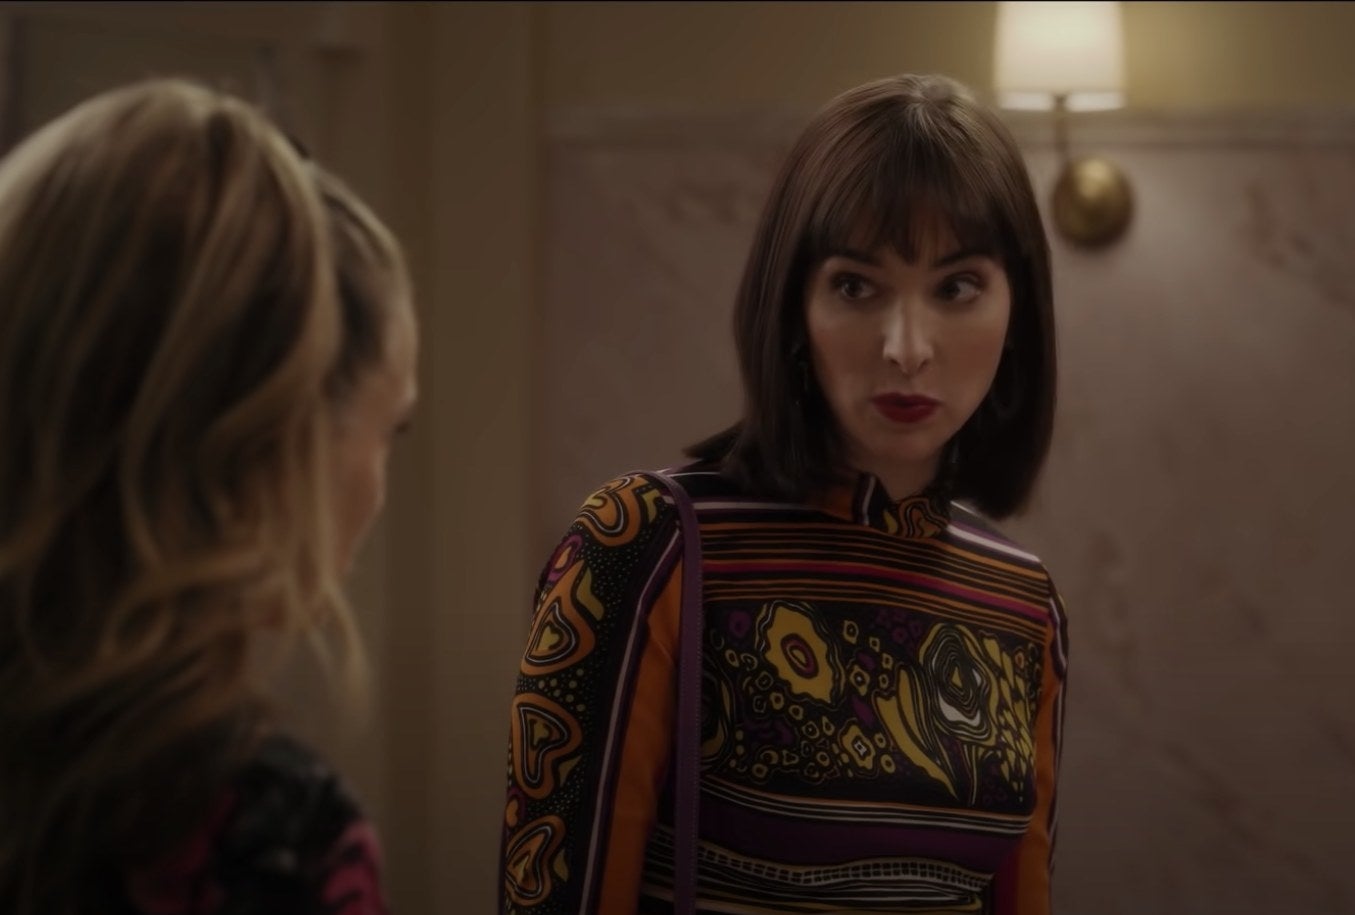 Hari Nef in a formal outfit talking to Sarah Jessica Parker in a bathroom.